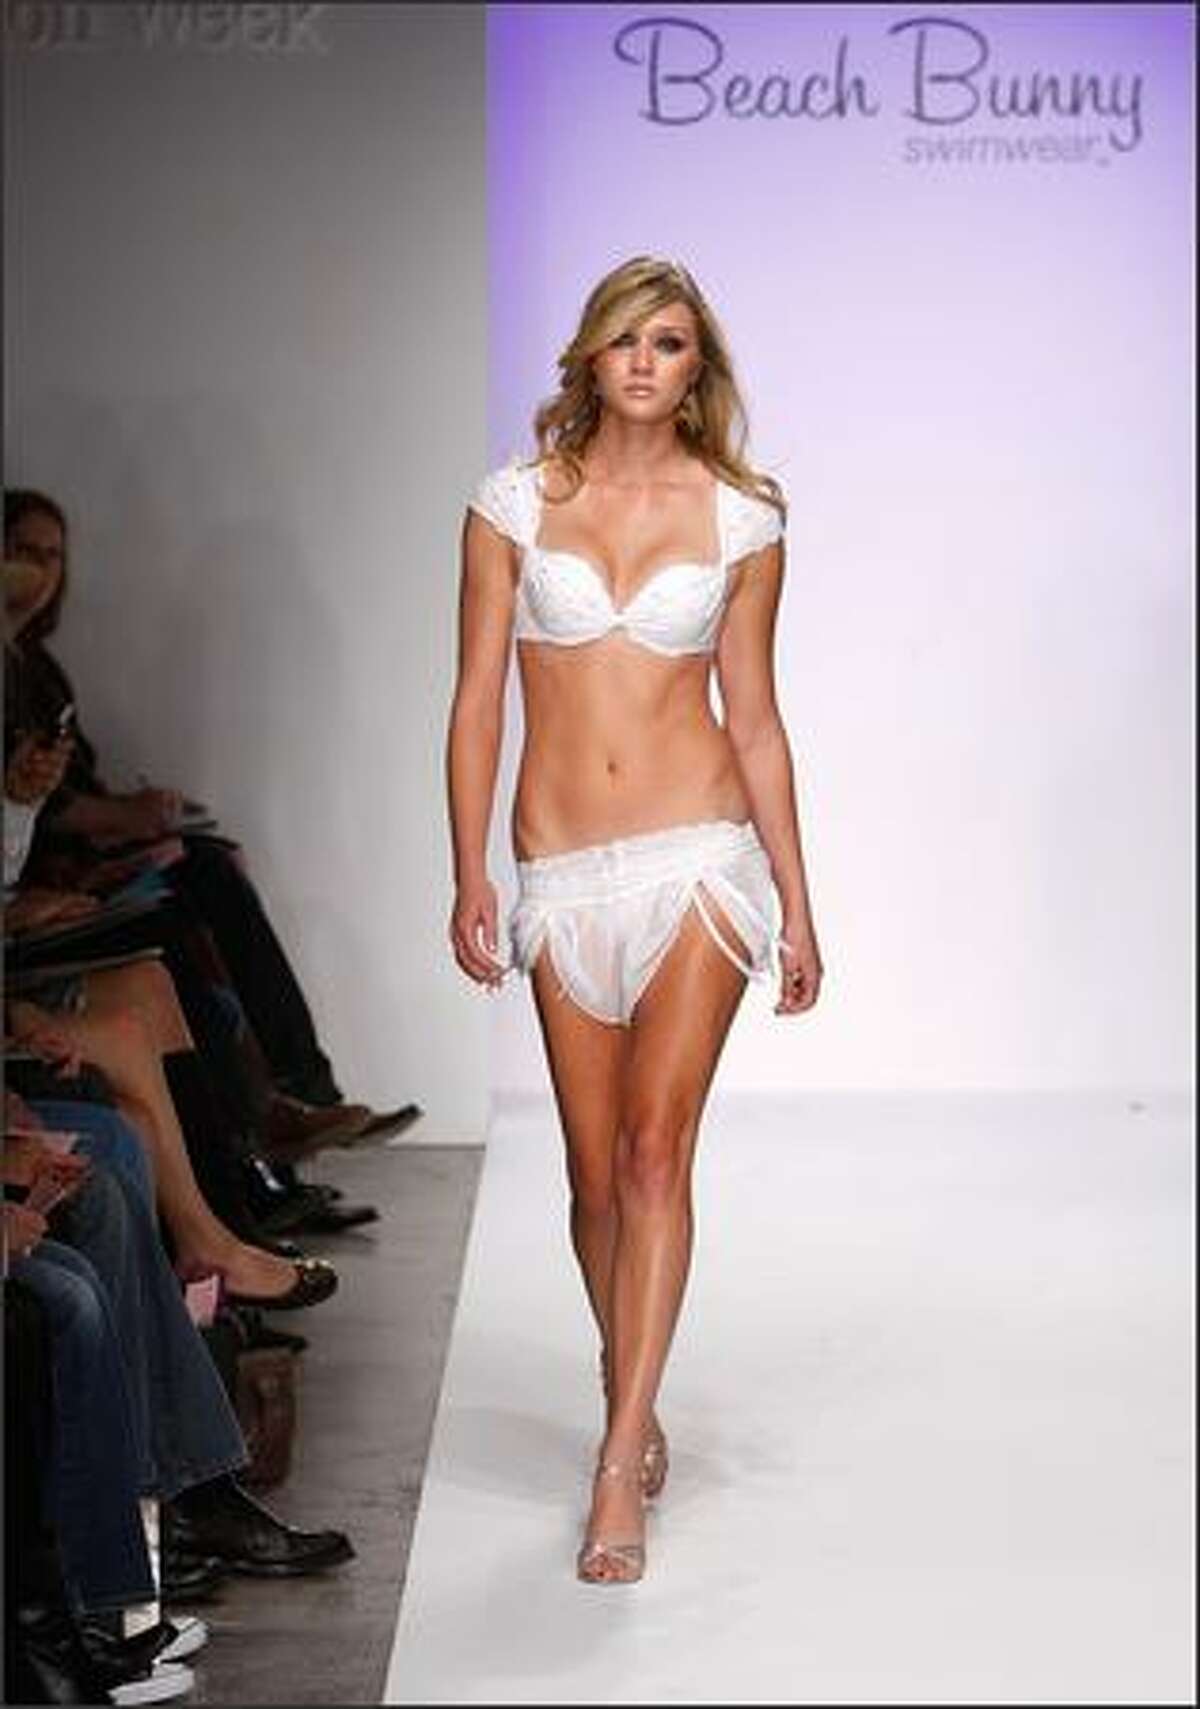 A model walks the runway at the Beach Bunny Swimwear Spring 2008 fashion show during Mercedes Benz Fashion Week held at Smashbox Studios in Culver City, Calif.